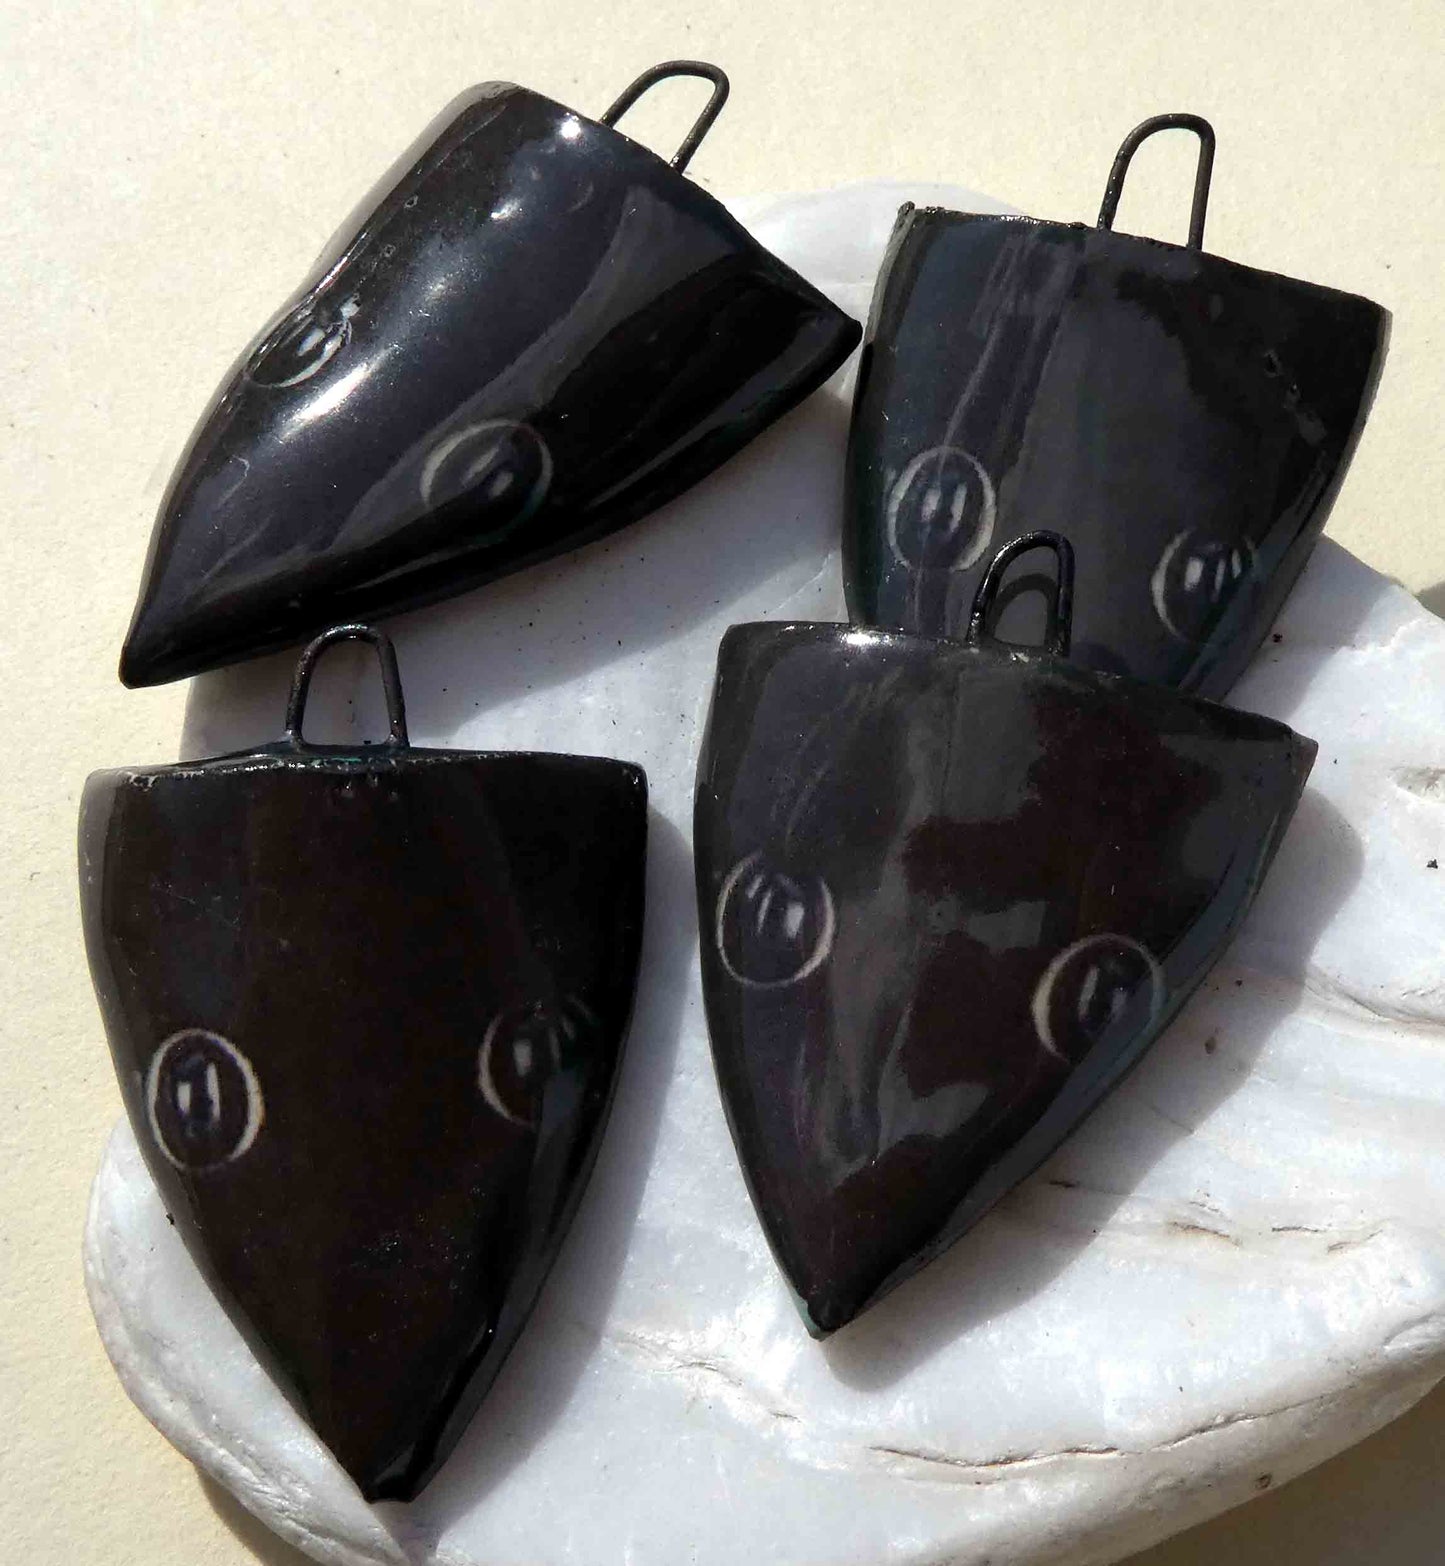 Ceramic Spooky Decal Shield Earring Charms -Black Cat #2